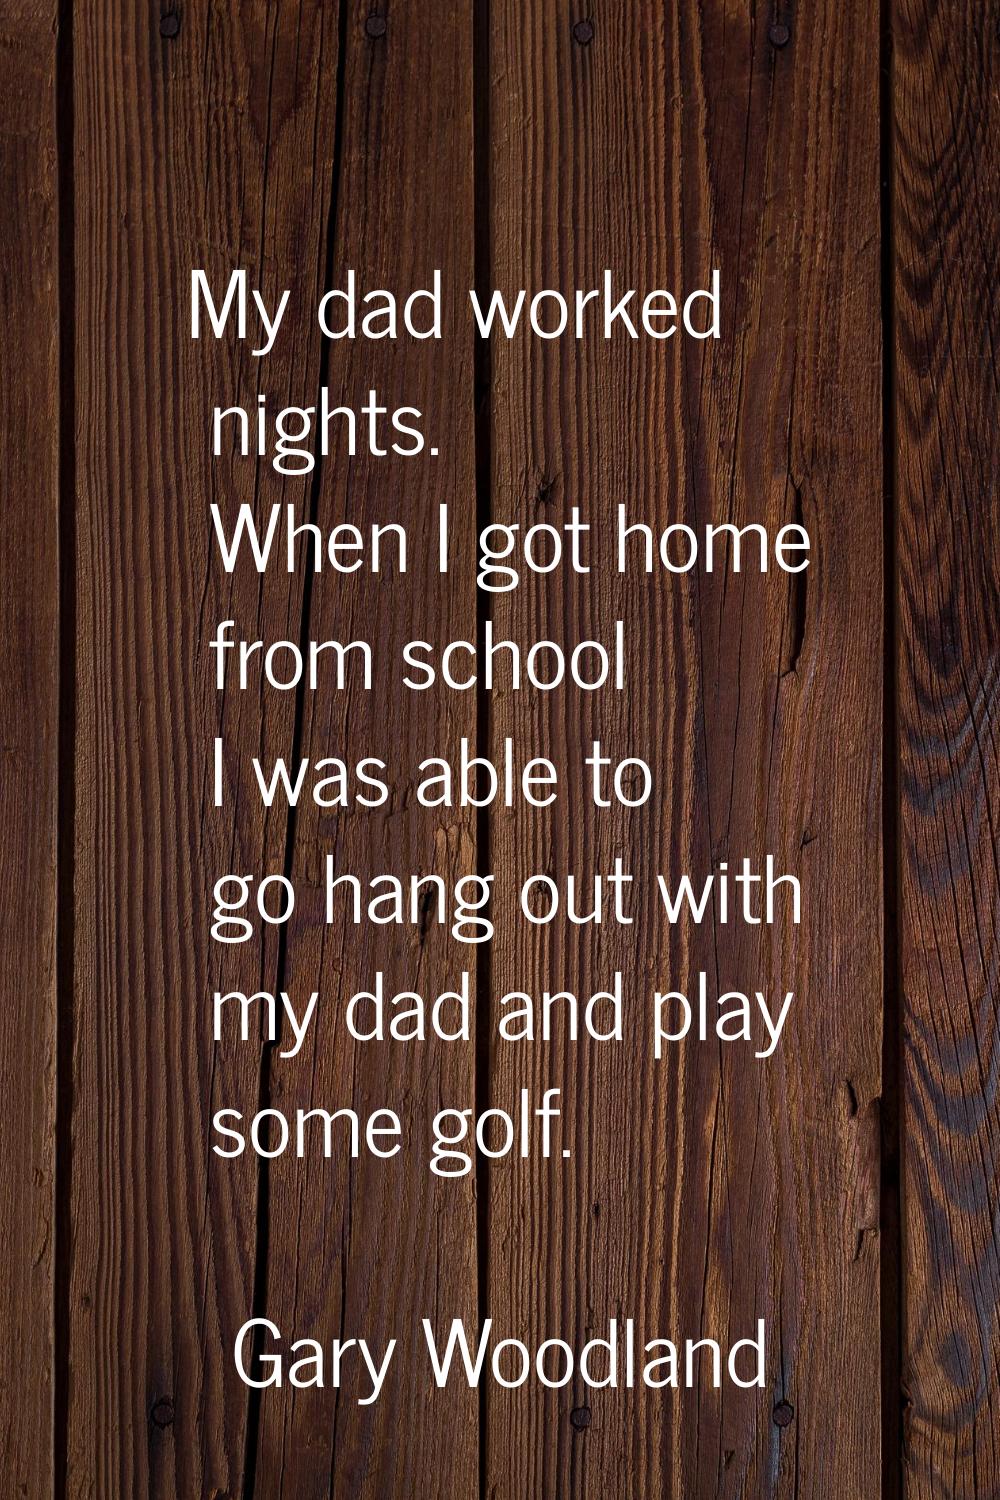 My dad worked nights. When I got home from school I was able to go hang out with my dad and play so